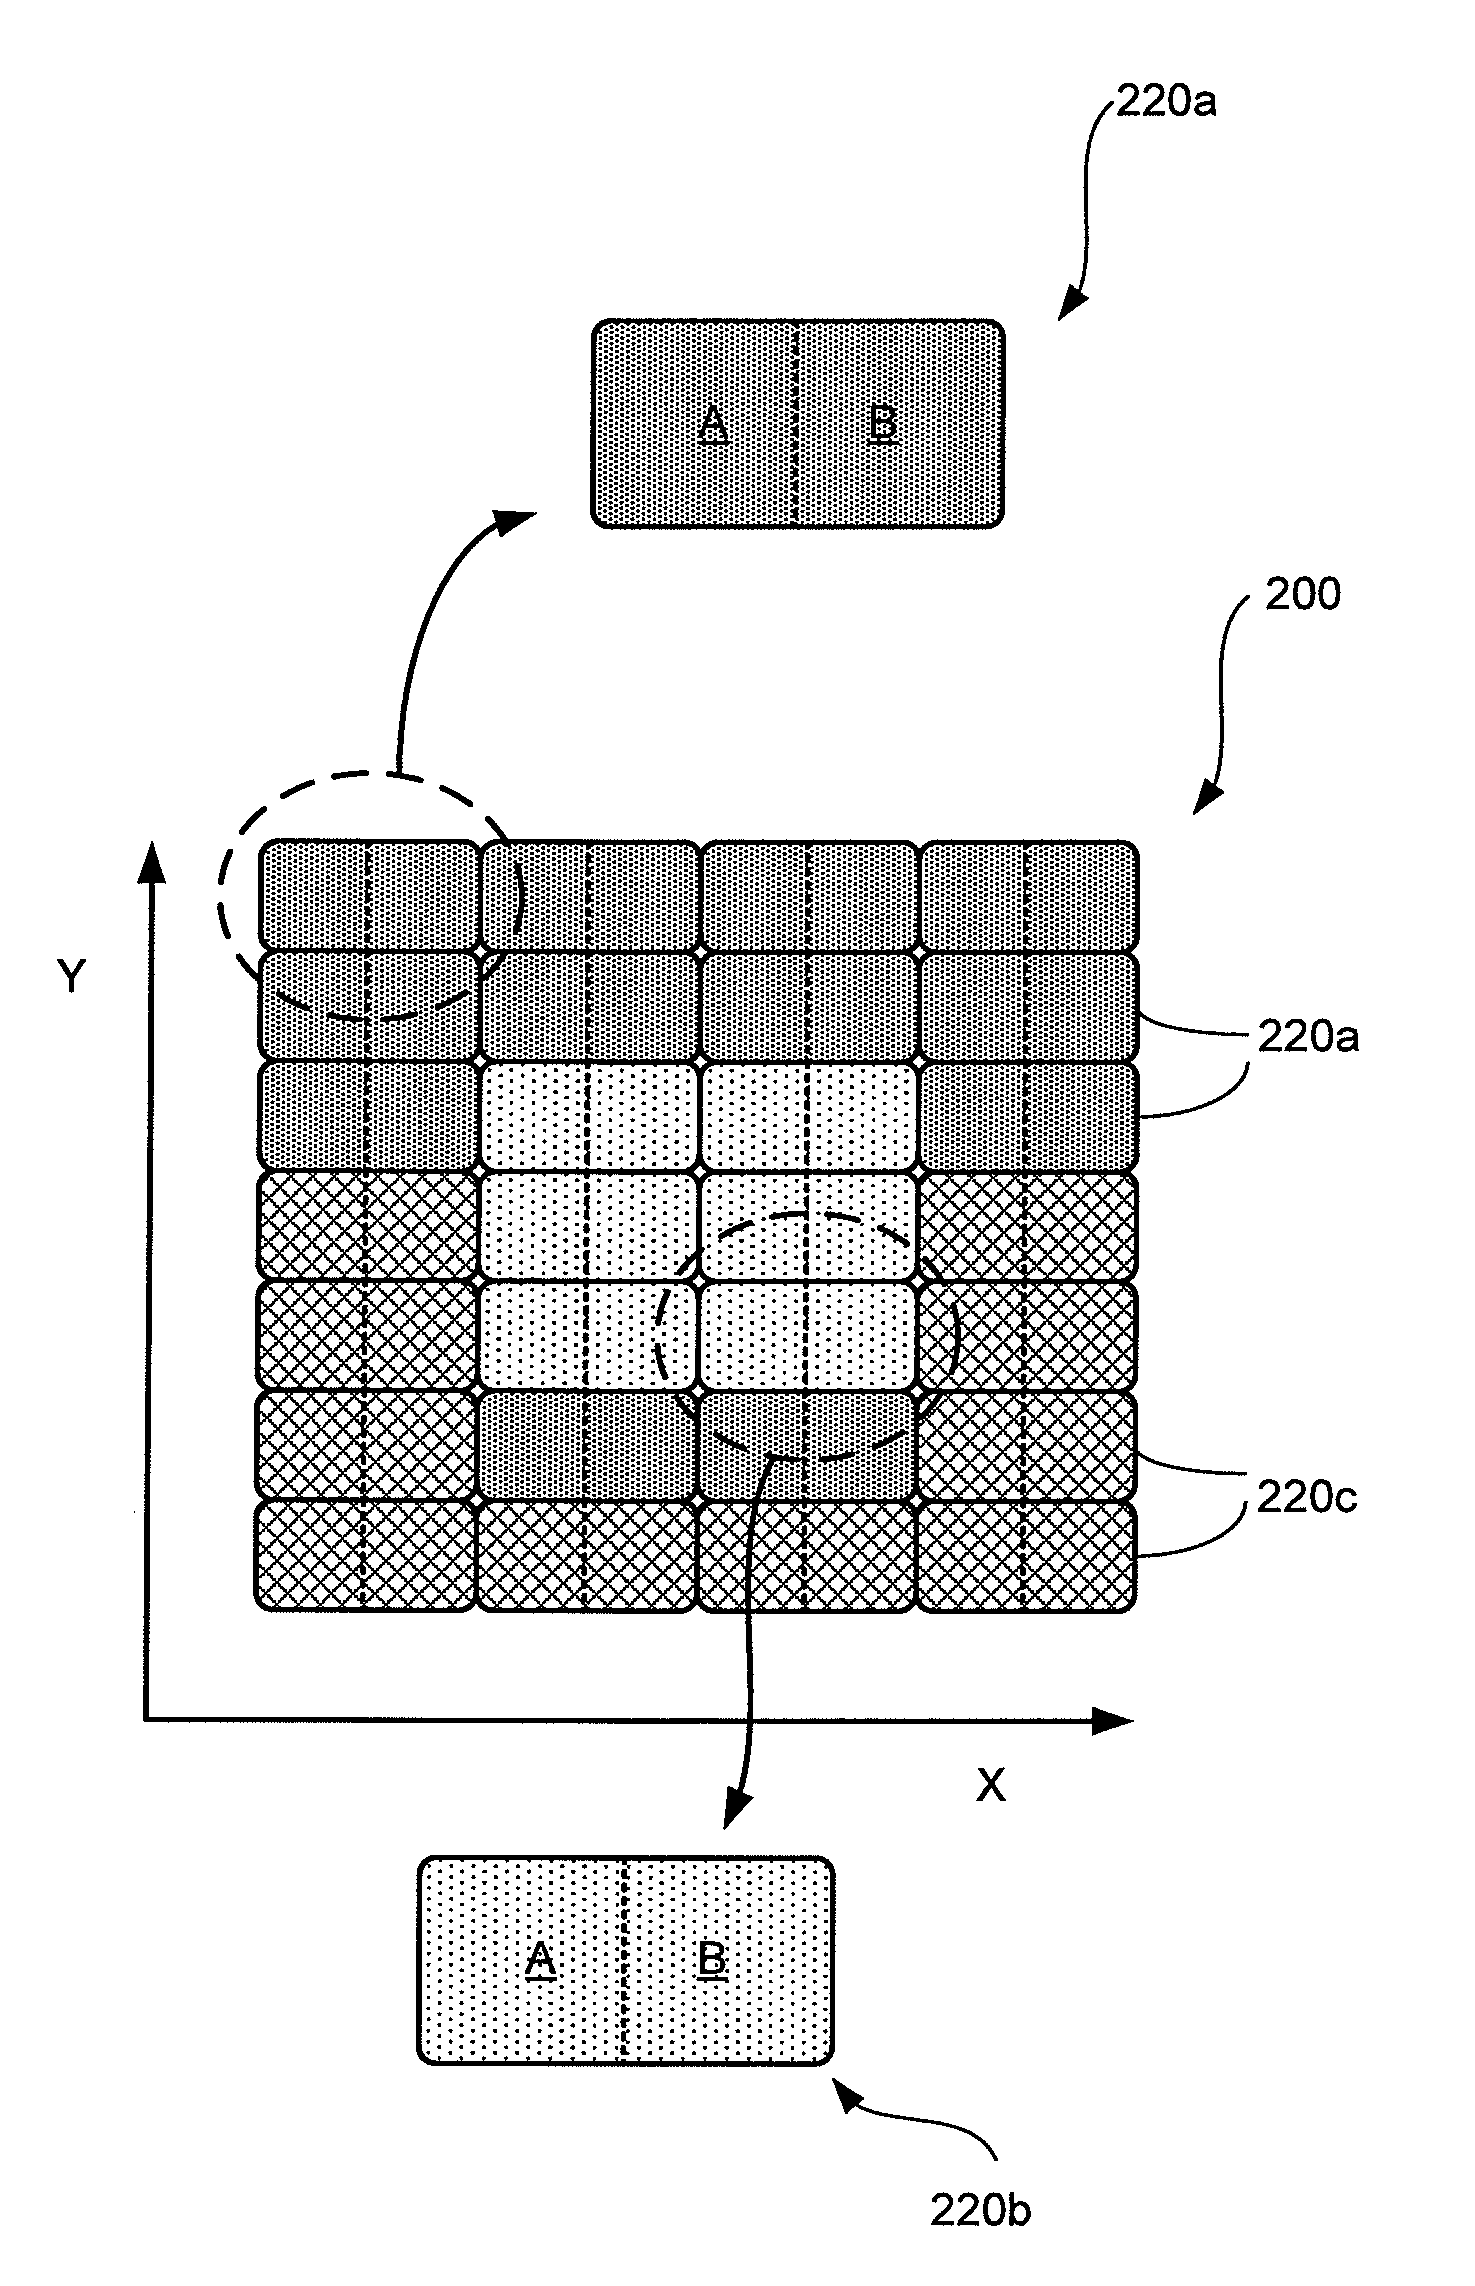 Radiation attenuation device and method includes radiation attenuating fluid and directly communicating adjacent chambers